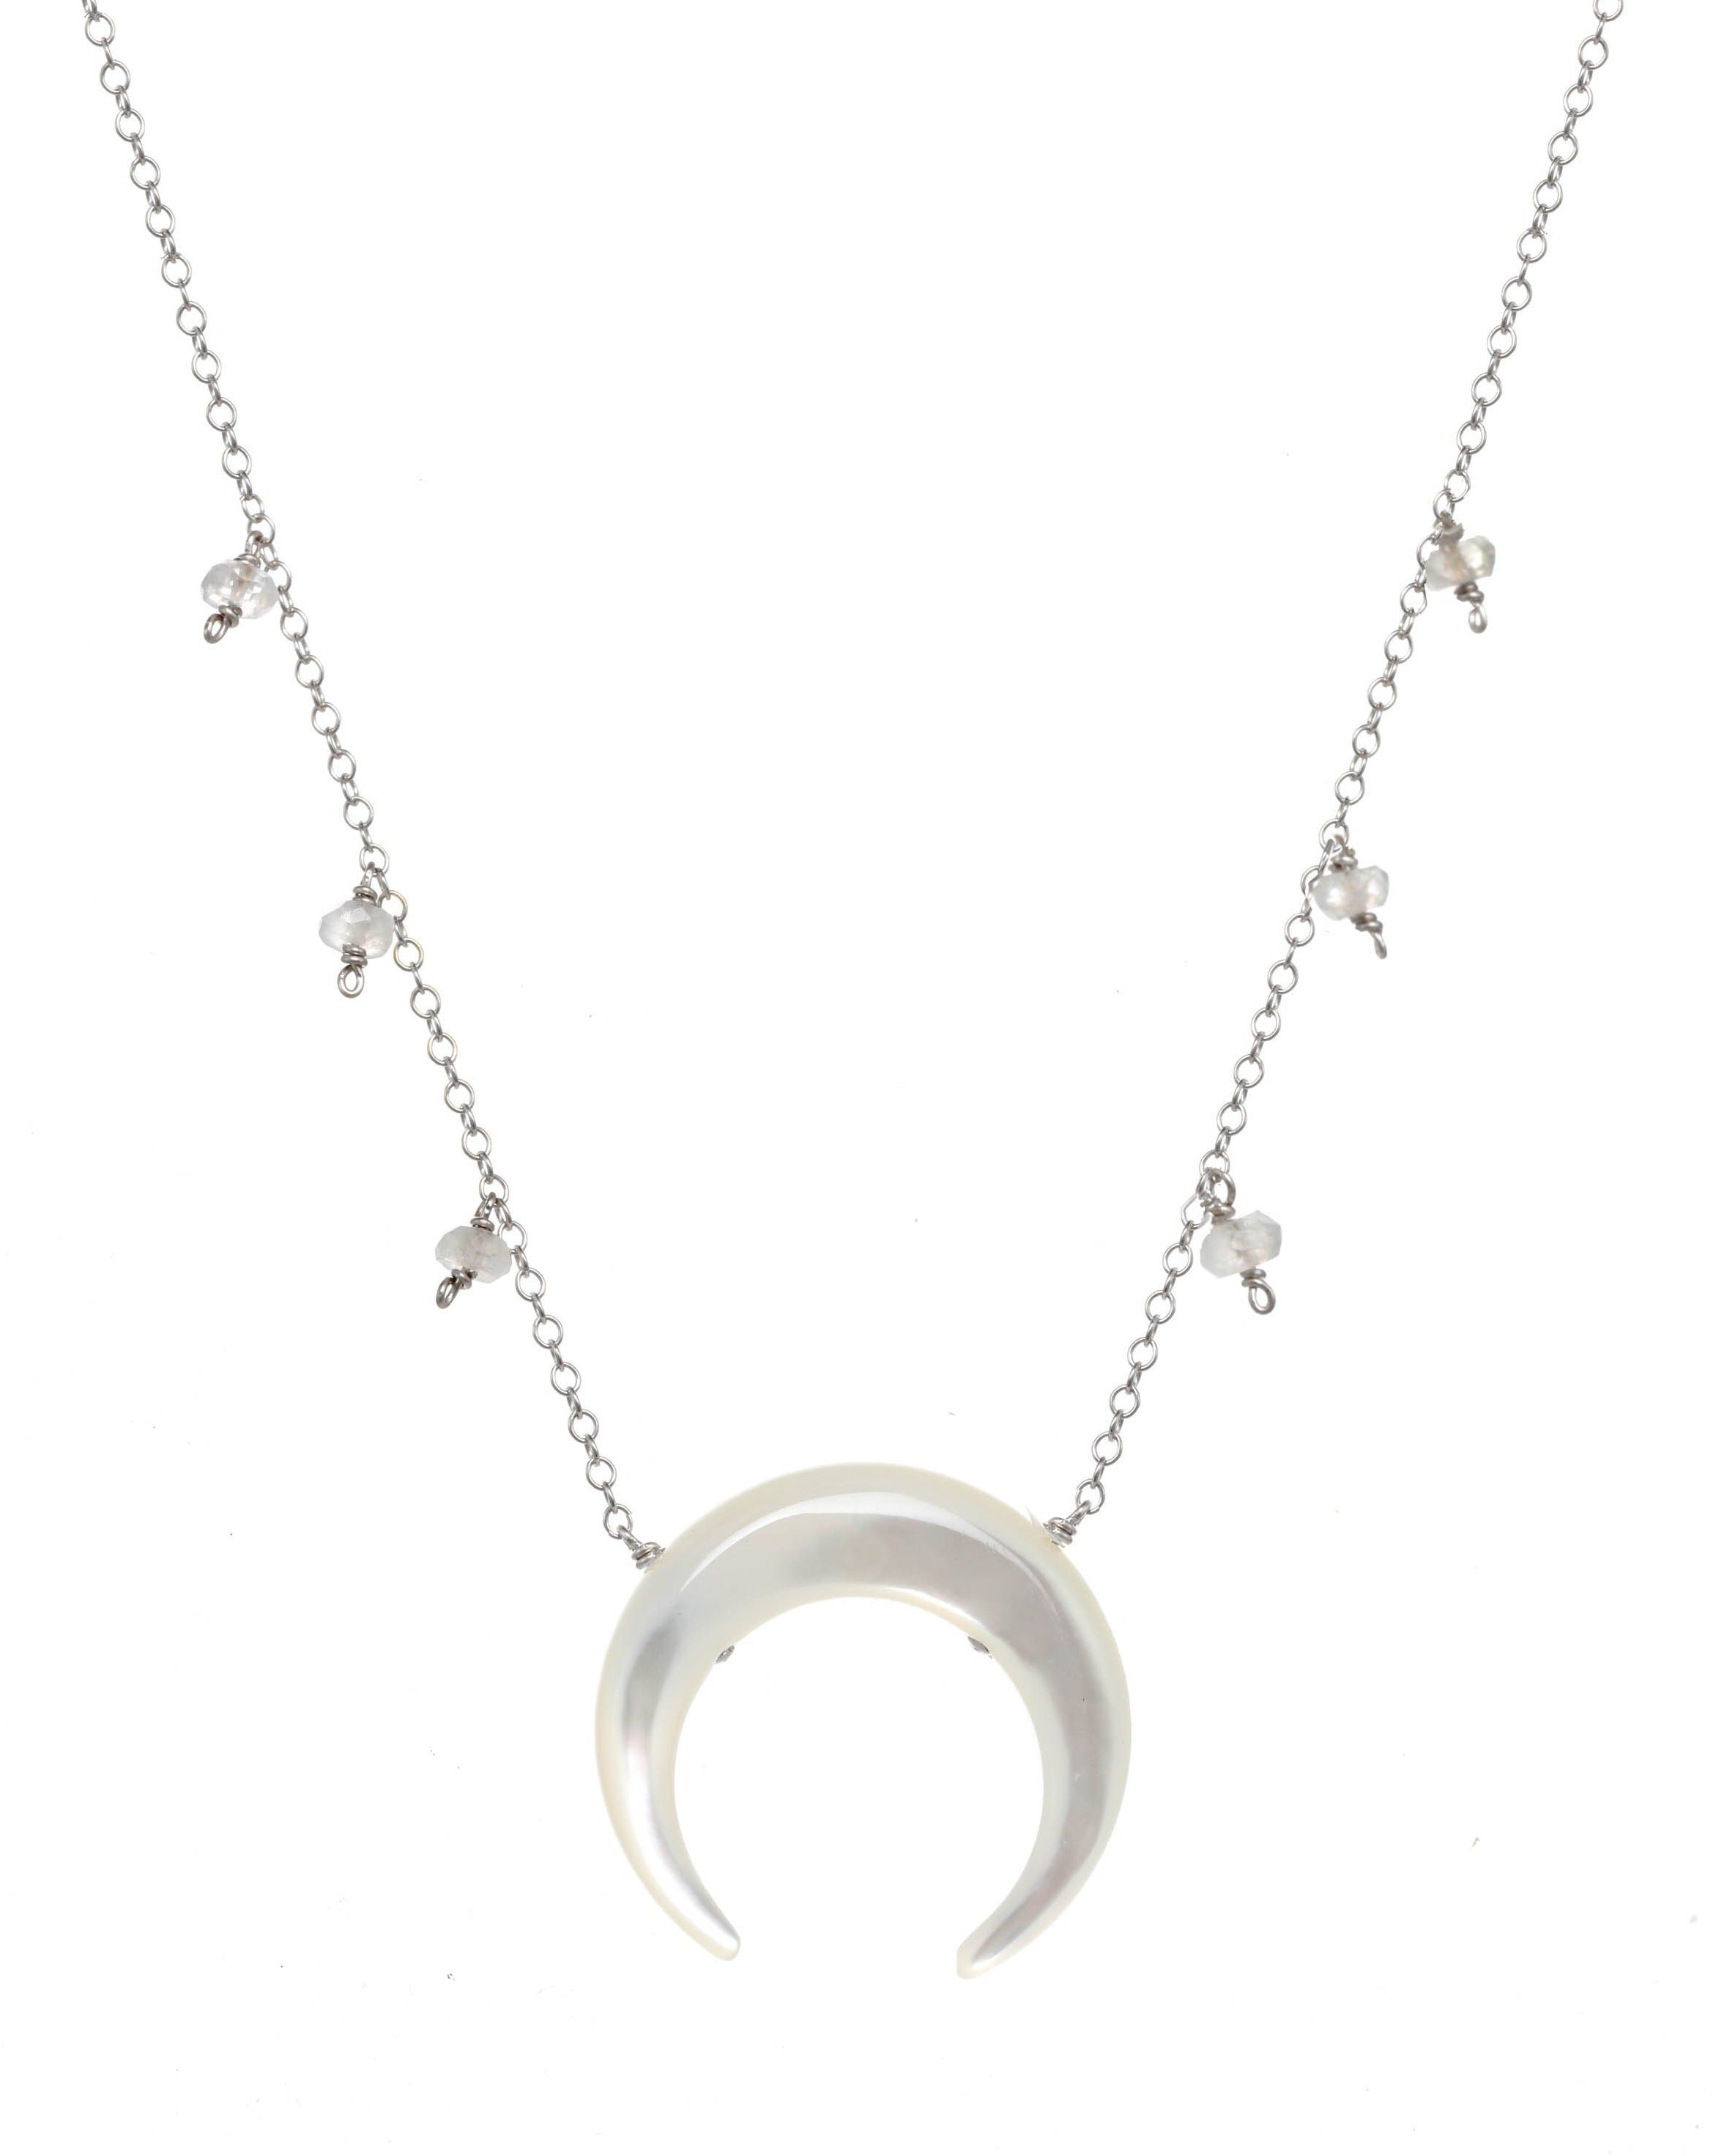 Baque Moon Necklace by KOZAKH. A 16 to 18 inch adjustable length necklace in Sterling Silver, featuring a 20mm hand-carved Mother of Pearl moon charm and 2mm faceted Moonstones.